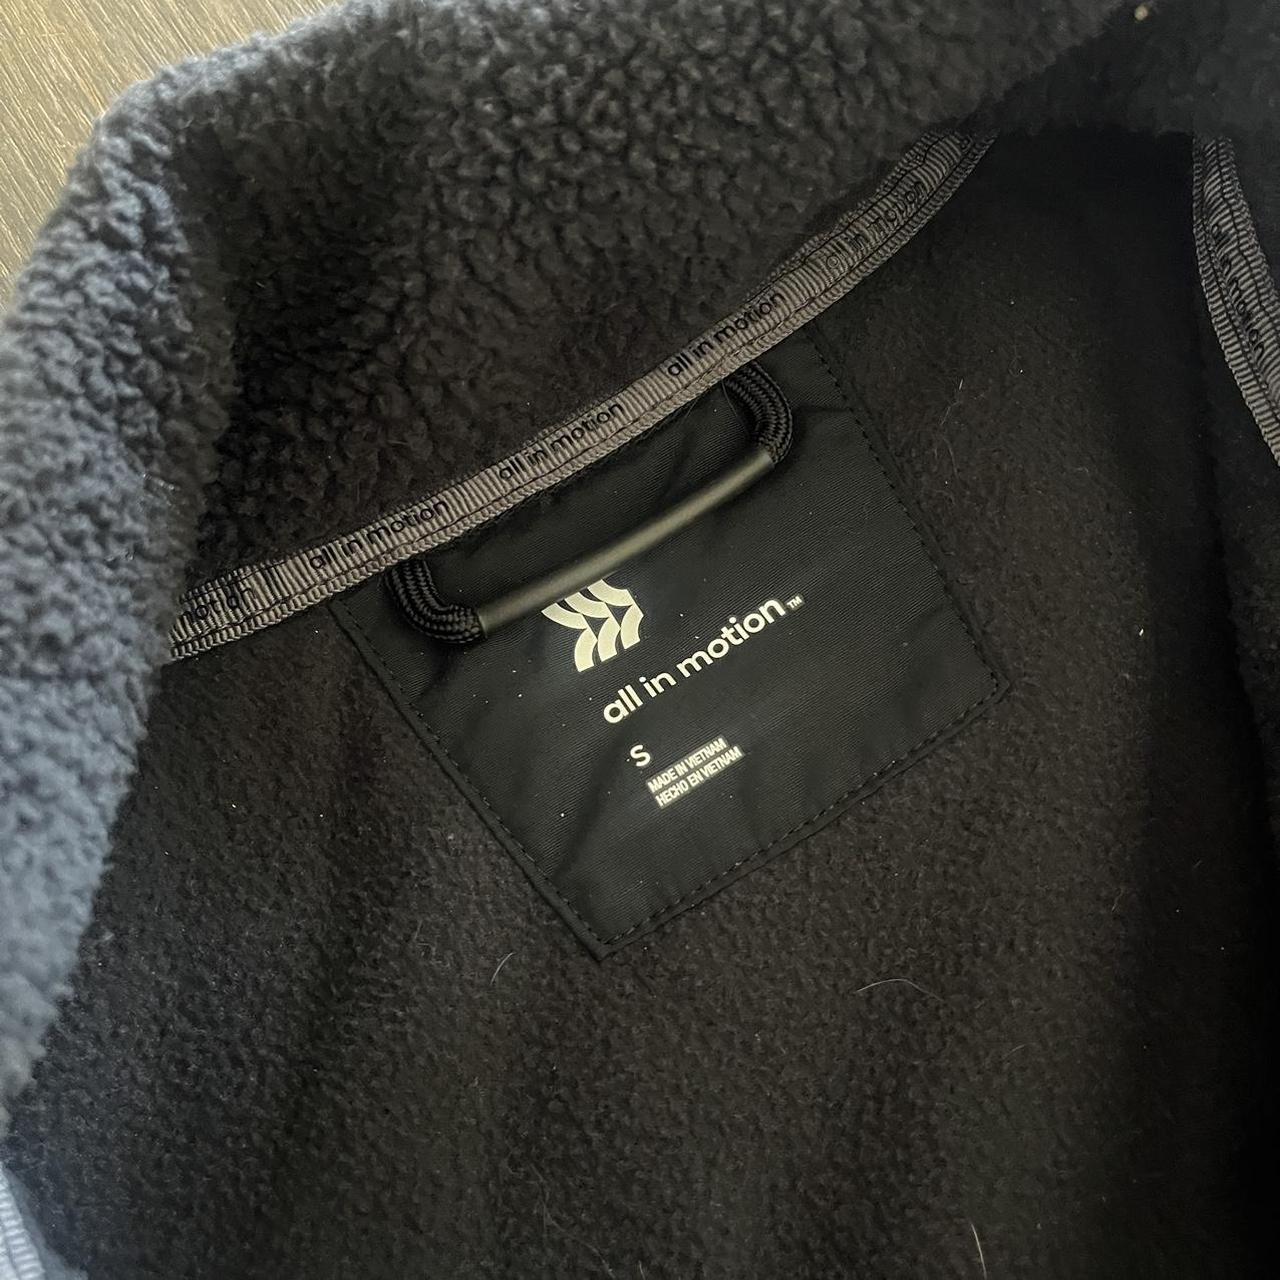 All In Motion Black Fleece tag says small - fits - Depop